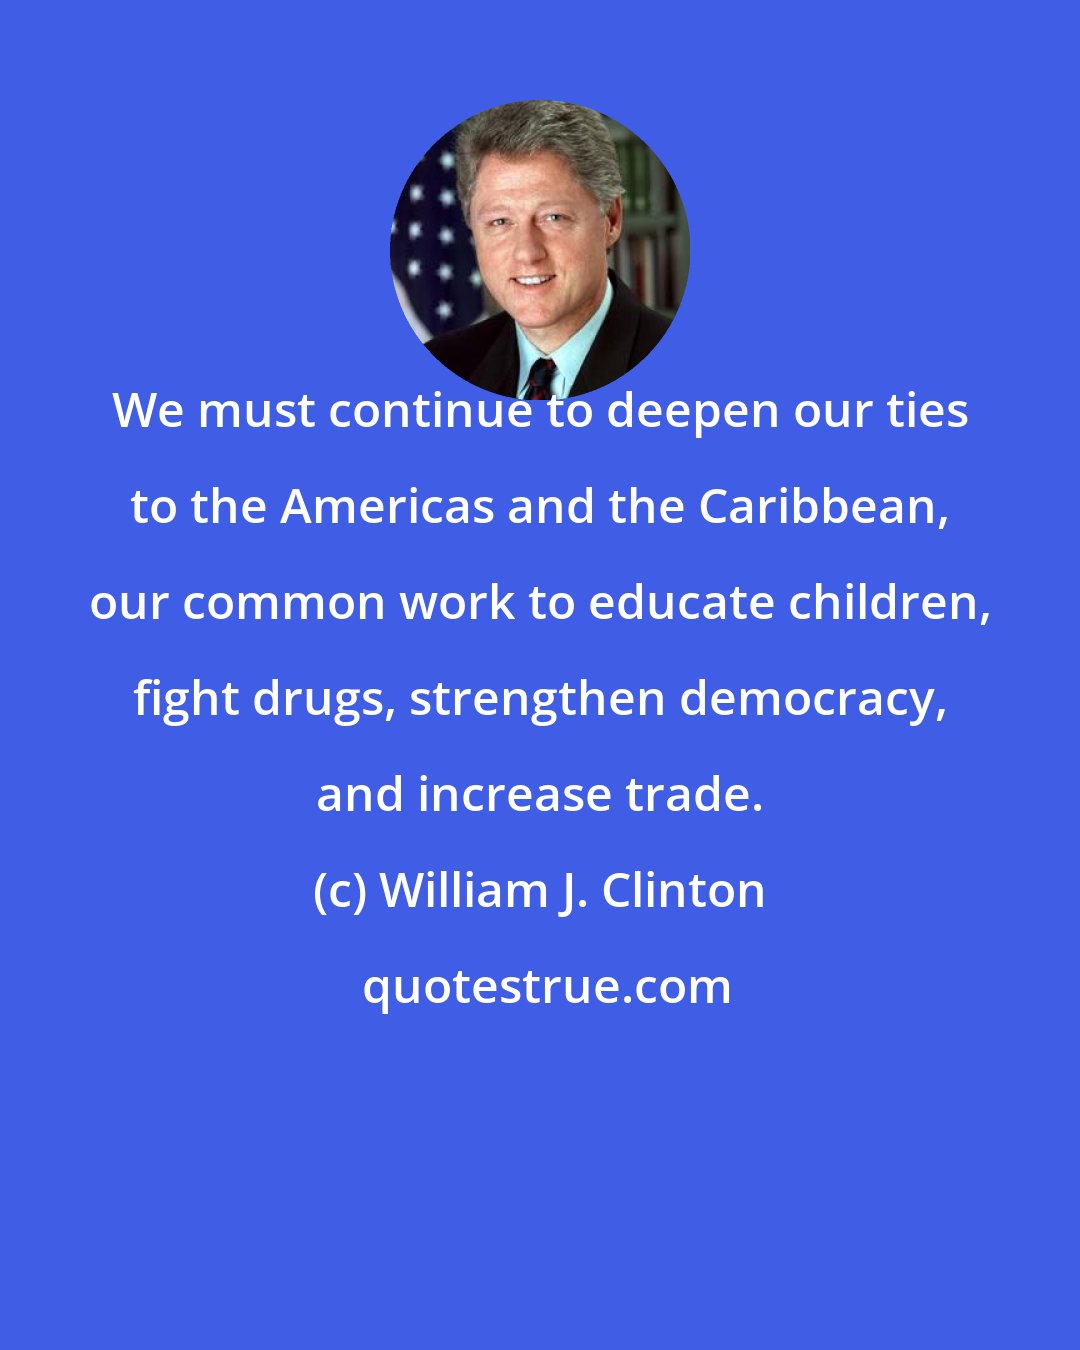 William J. Clinton: We must continue to deepen our ties to the Americas and the Caribbean, our common work to educate children, fight drugs, strengthen democracy, and increase trade.